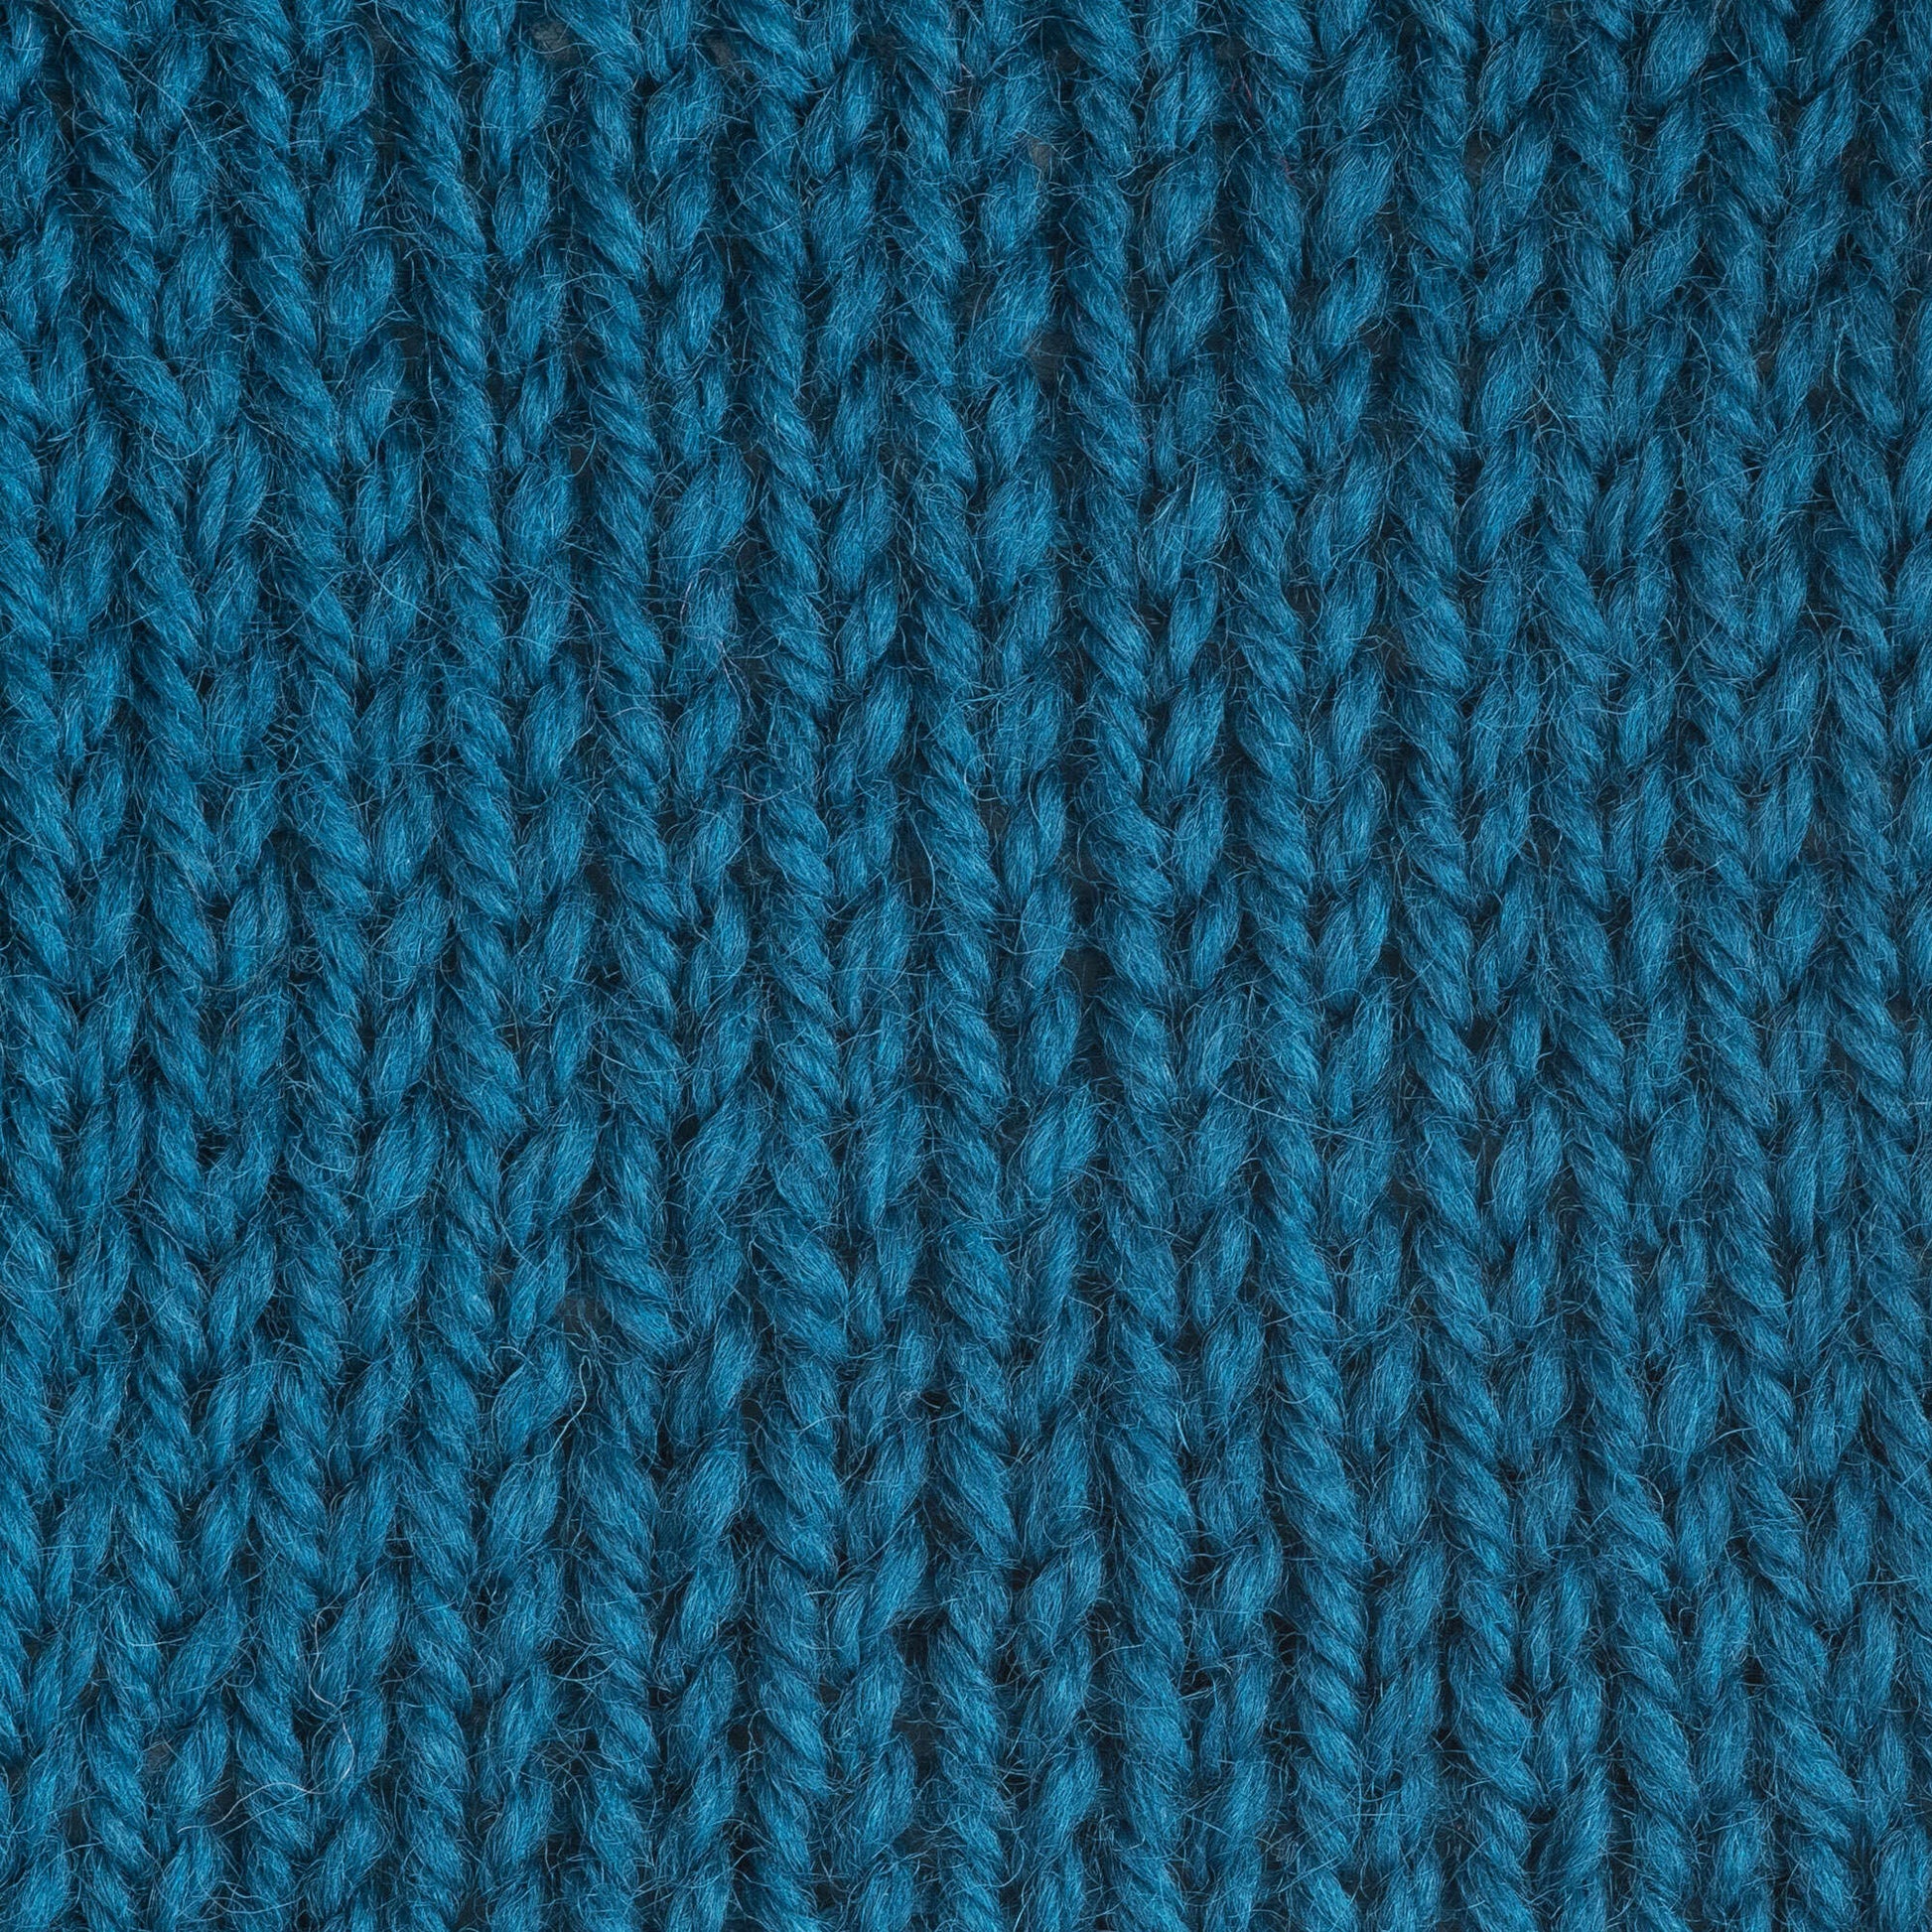 Patons Classic Wool Worsted Yarn - Discontinued Shades Peacock